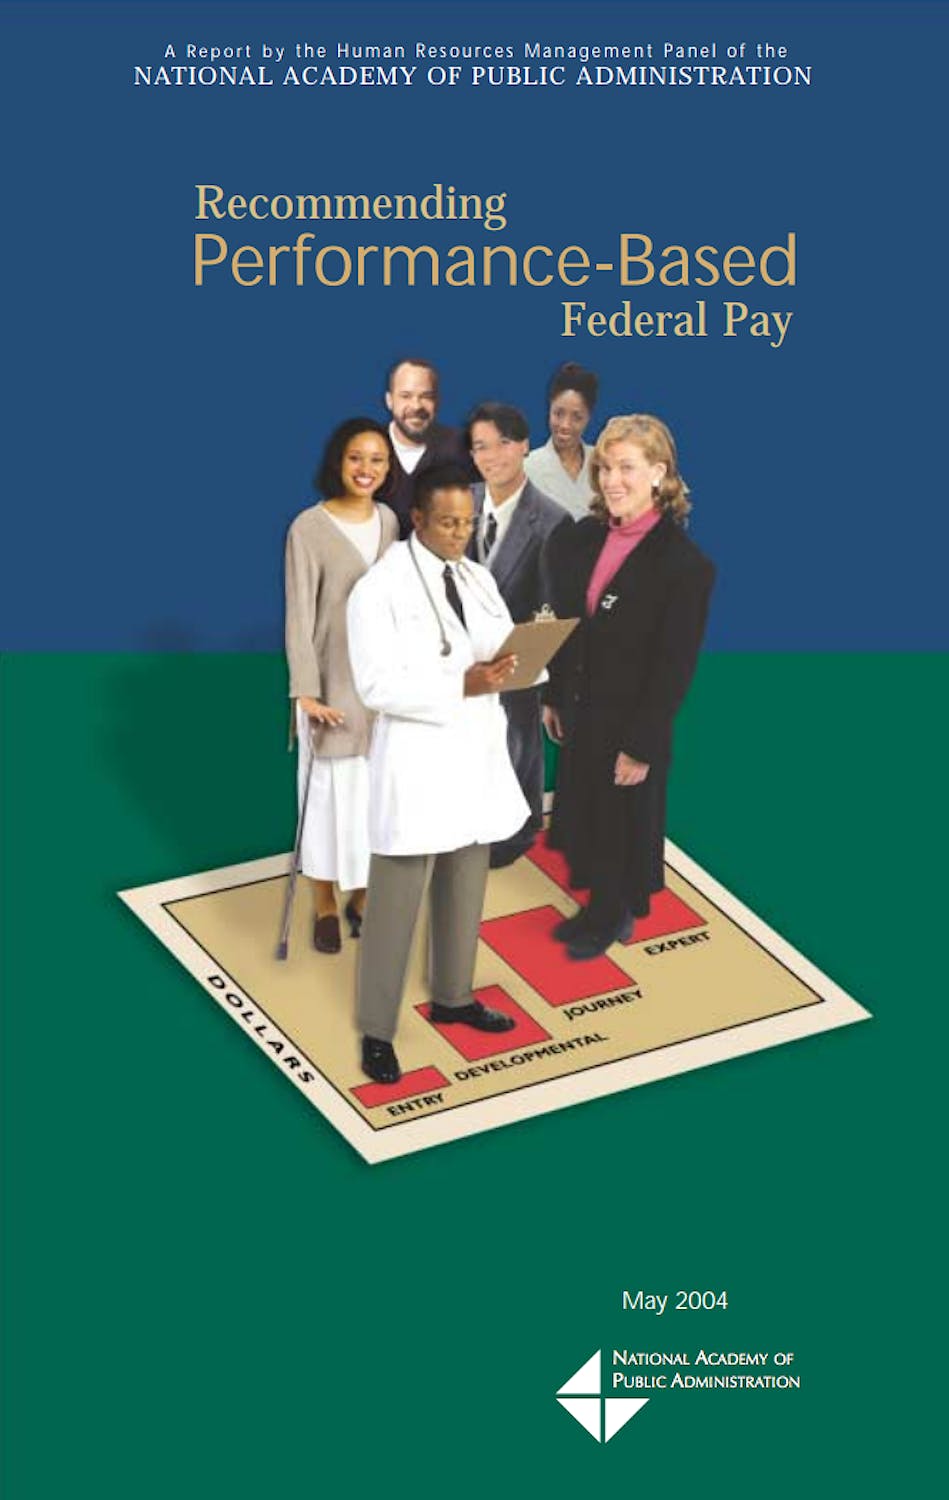 04 08 Reccommending Performance Based Federal Pay